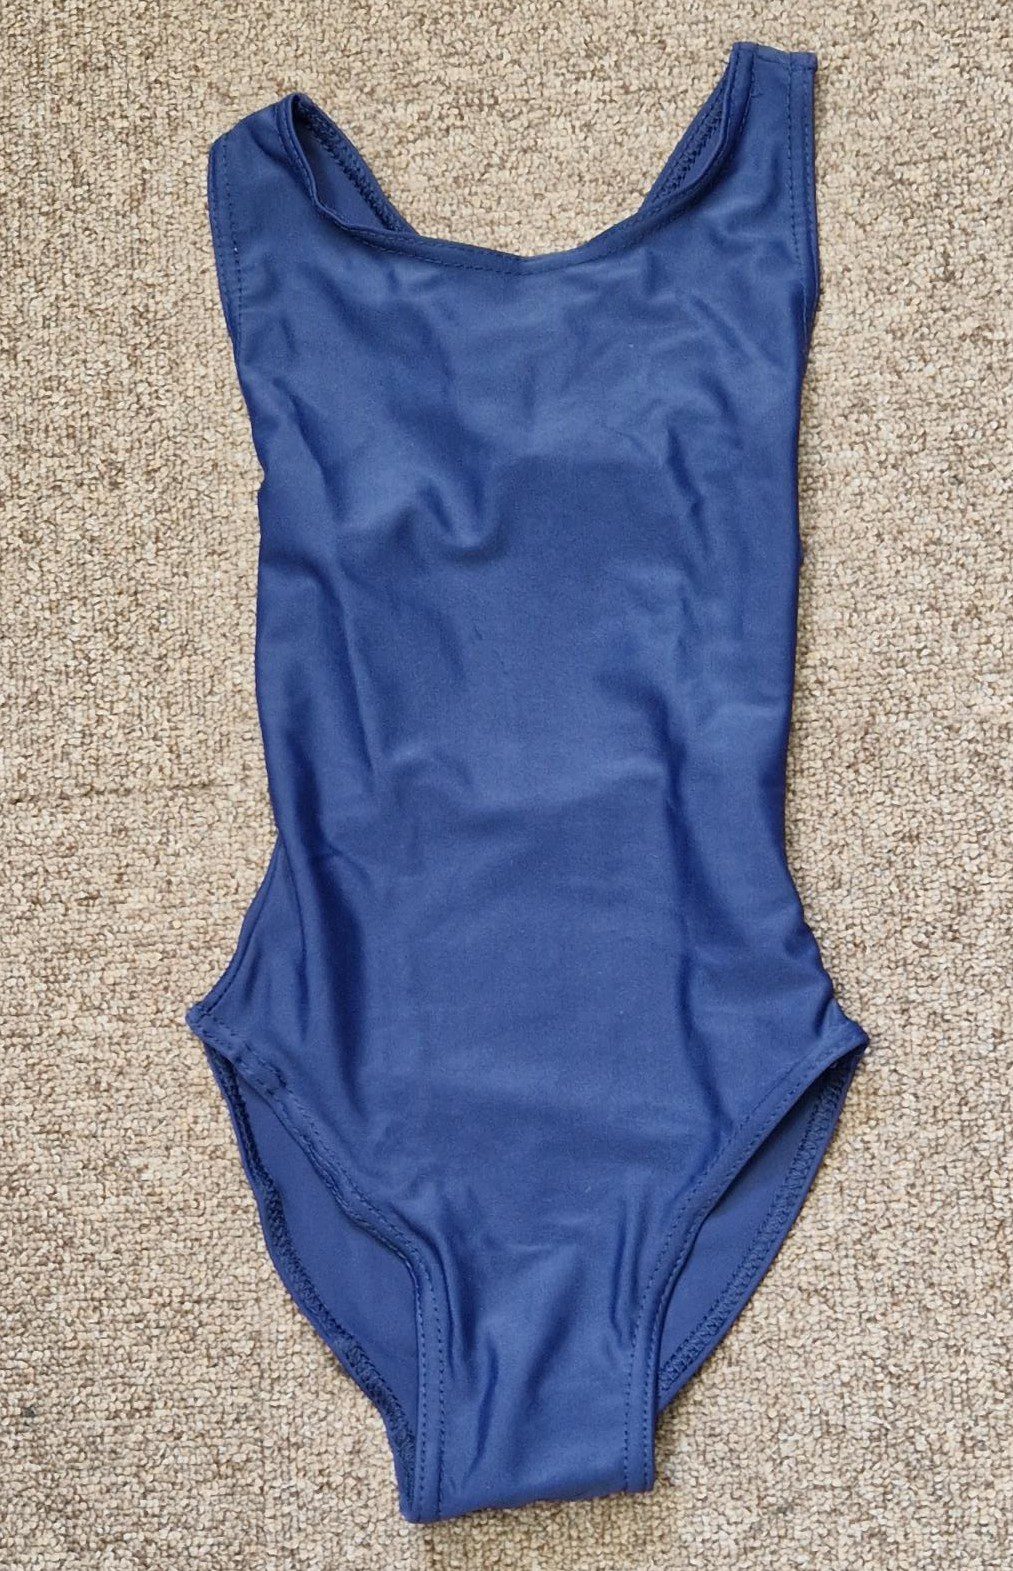 Navy Blue Swimsuit With Racer Back - DANCERS